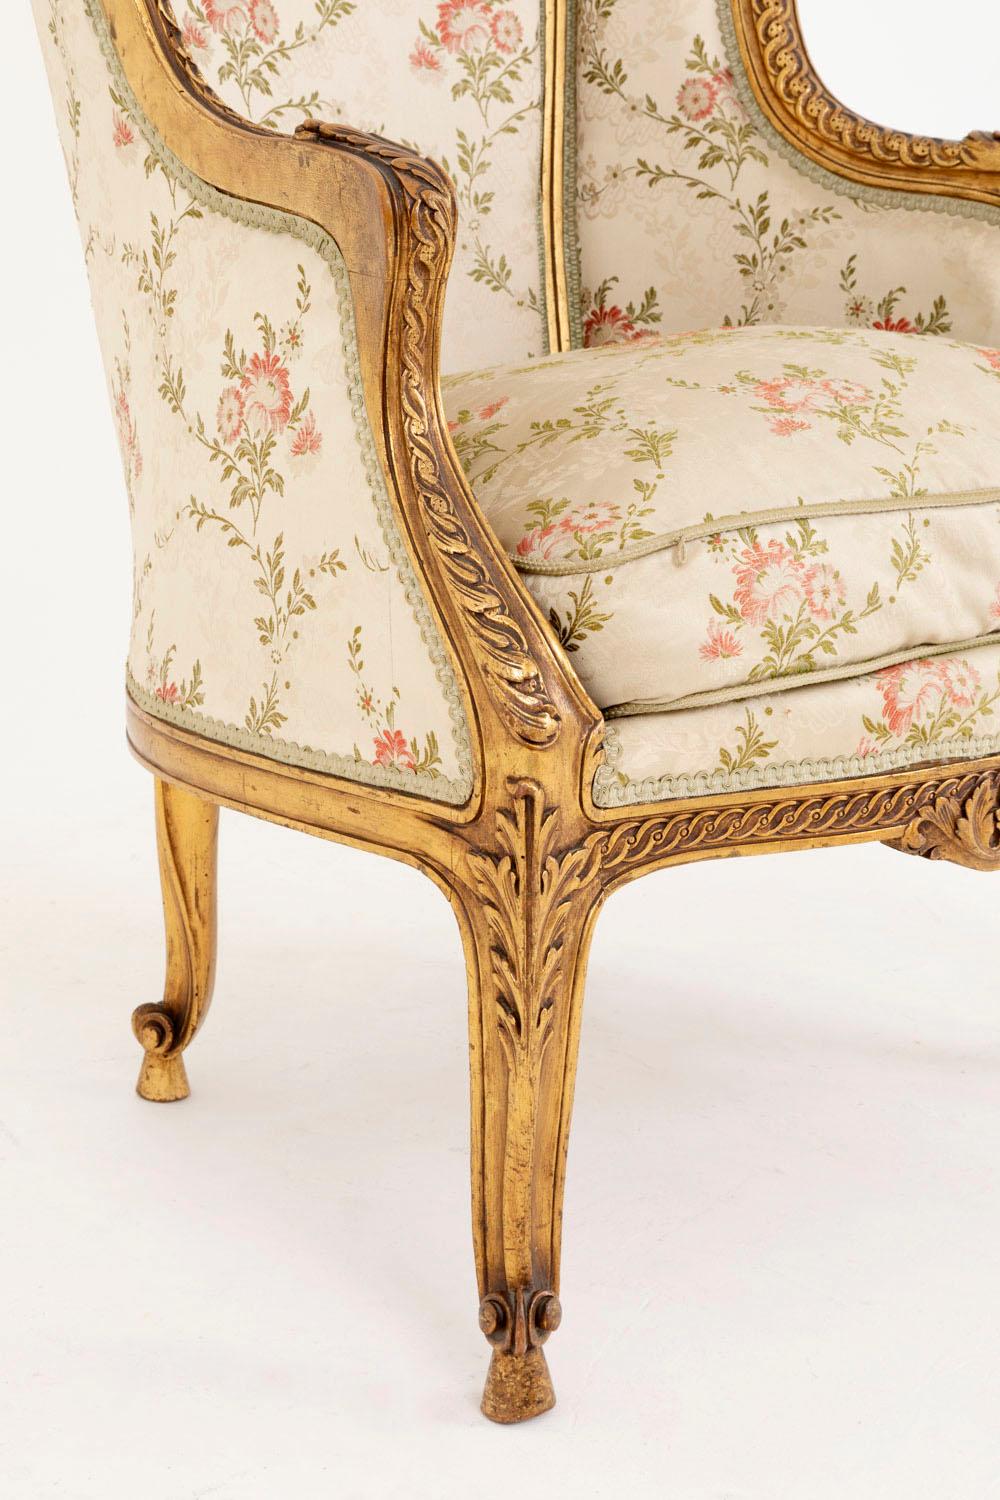 Wood Transition Style Bergere in Giltwood, circa 1880